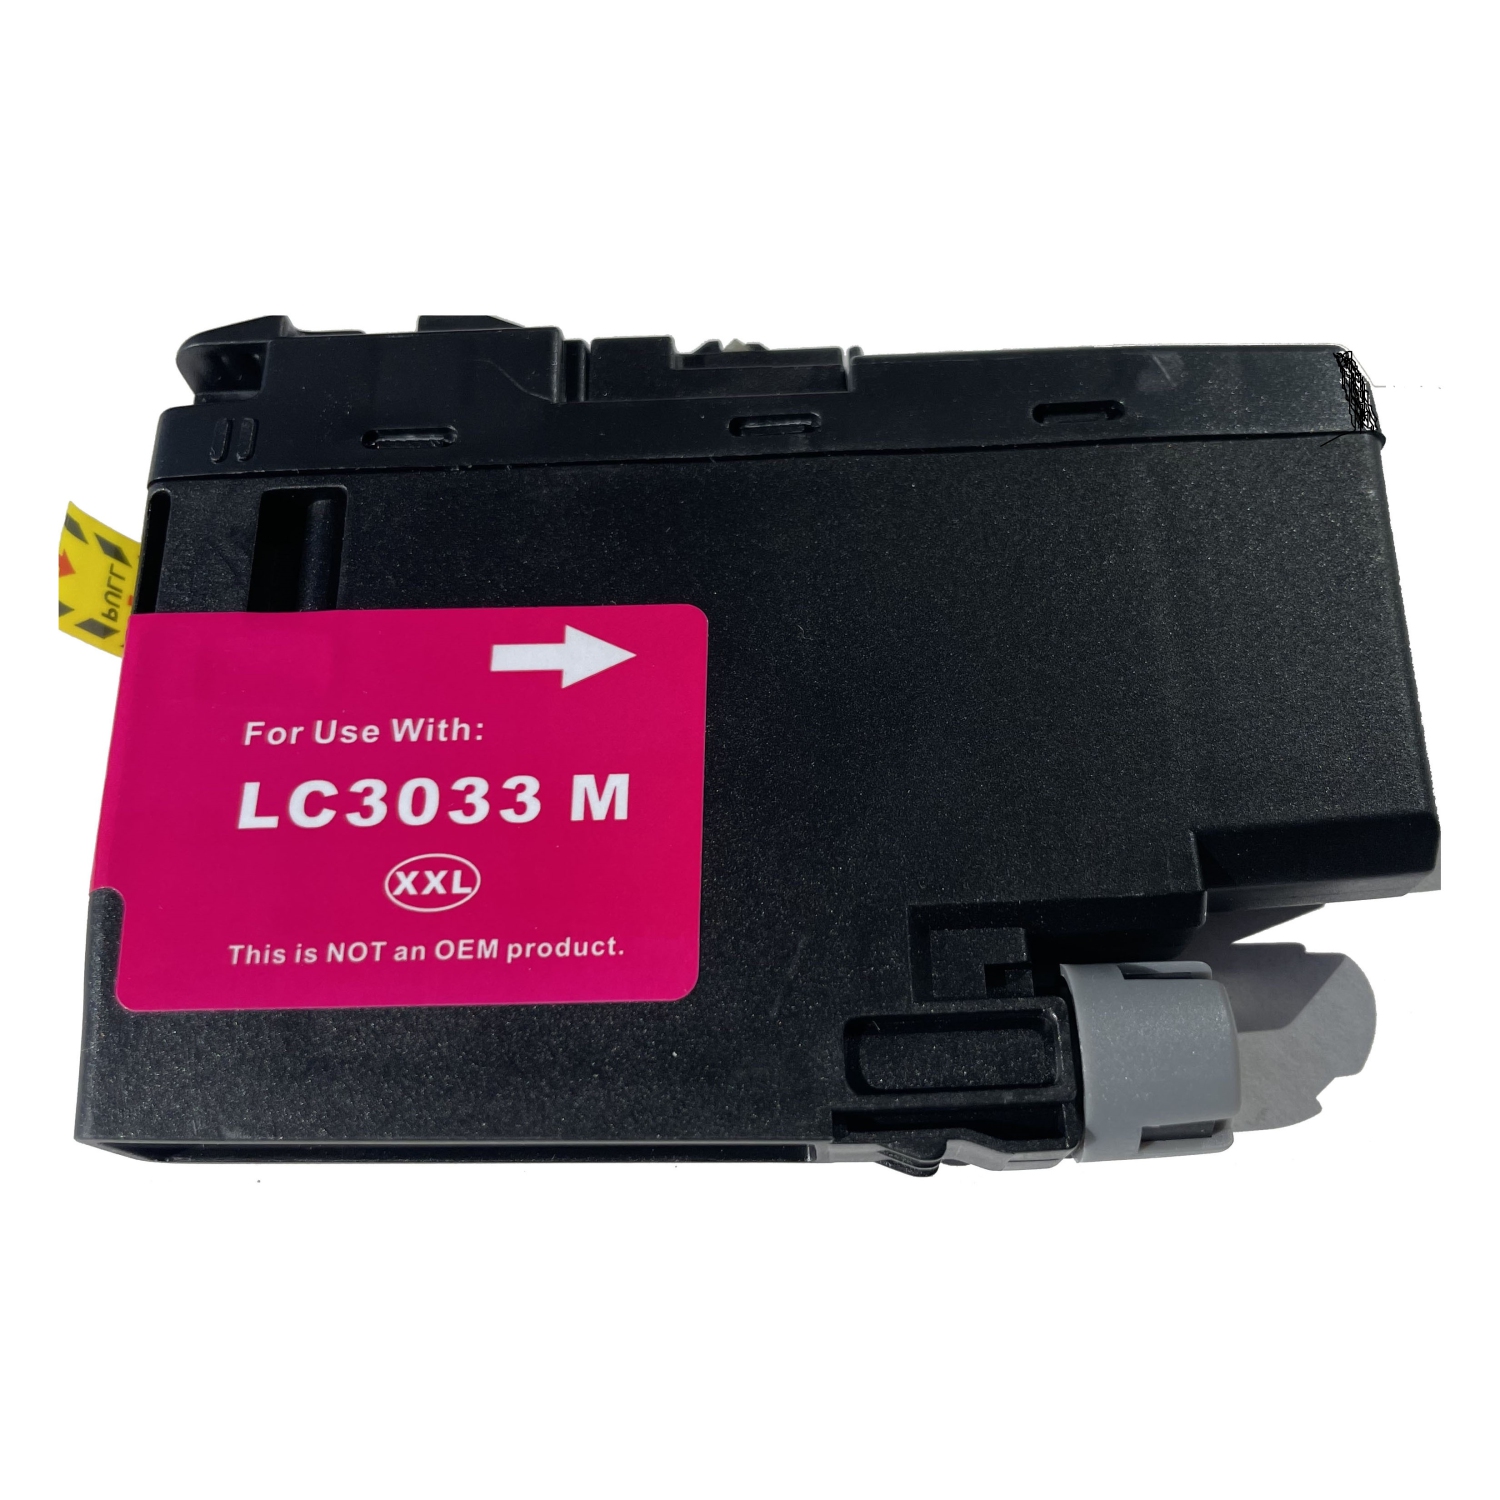 TONER4U - 1Magenta Ink Cartridge Compatible LC3033 XXL Extra High Yield for Brother LC3033 MFC-J805DW, MFC-J995DW, MFC-J995DWX